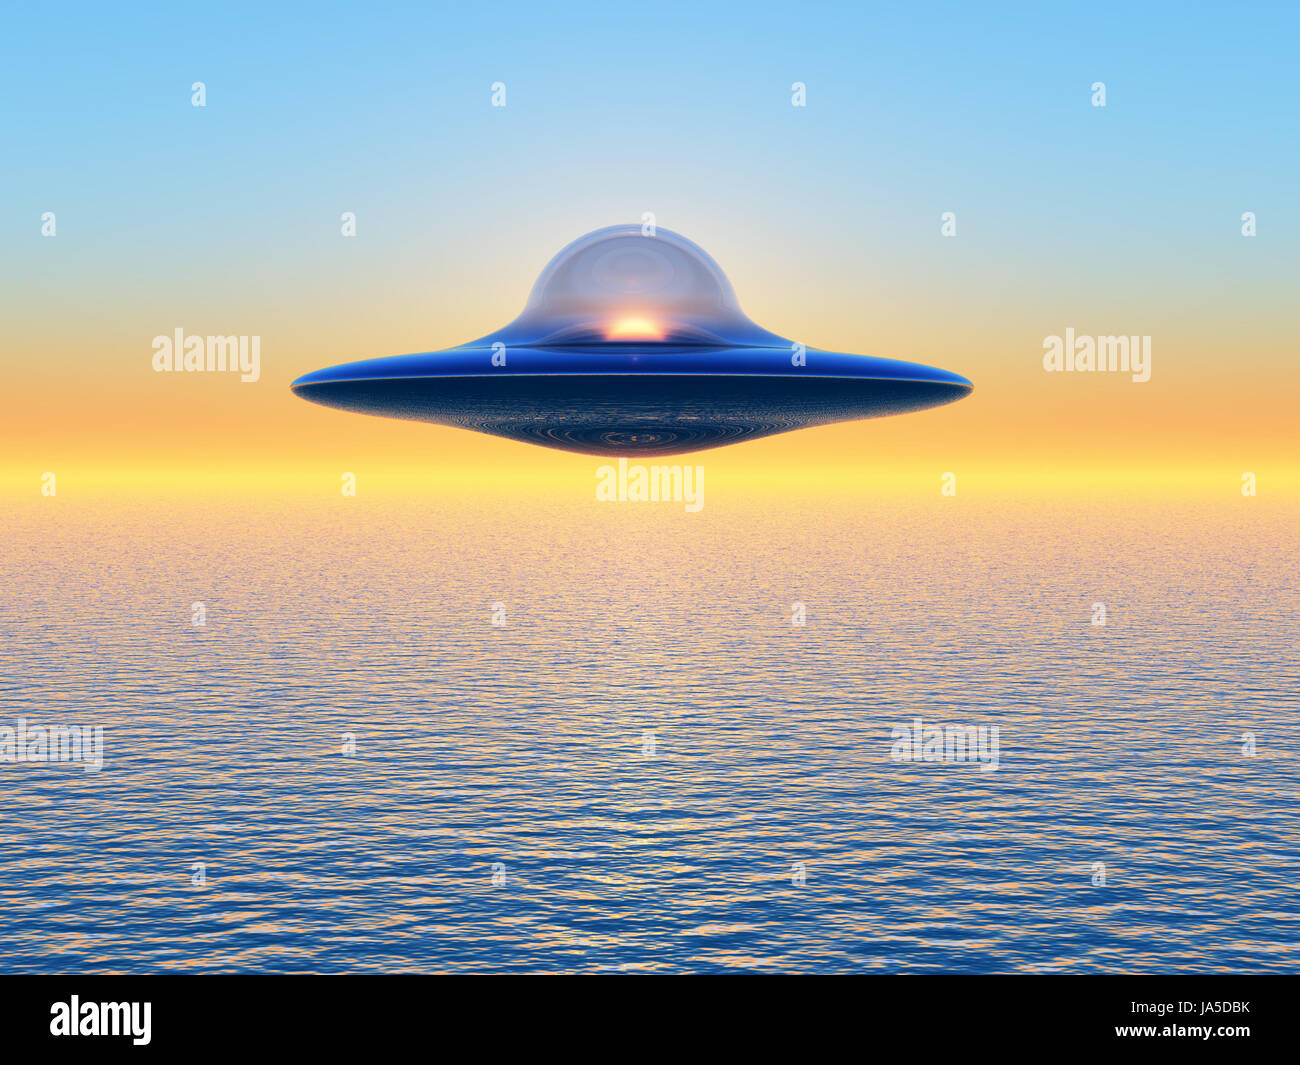 extraterrestrial, invasion, observer, viewer, public, auditory, visitor, Stock Photo